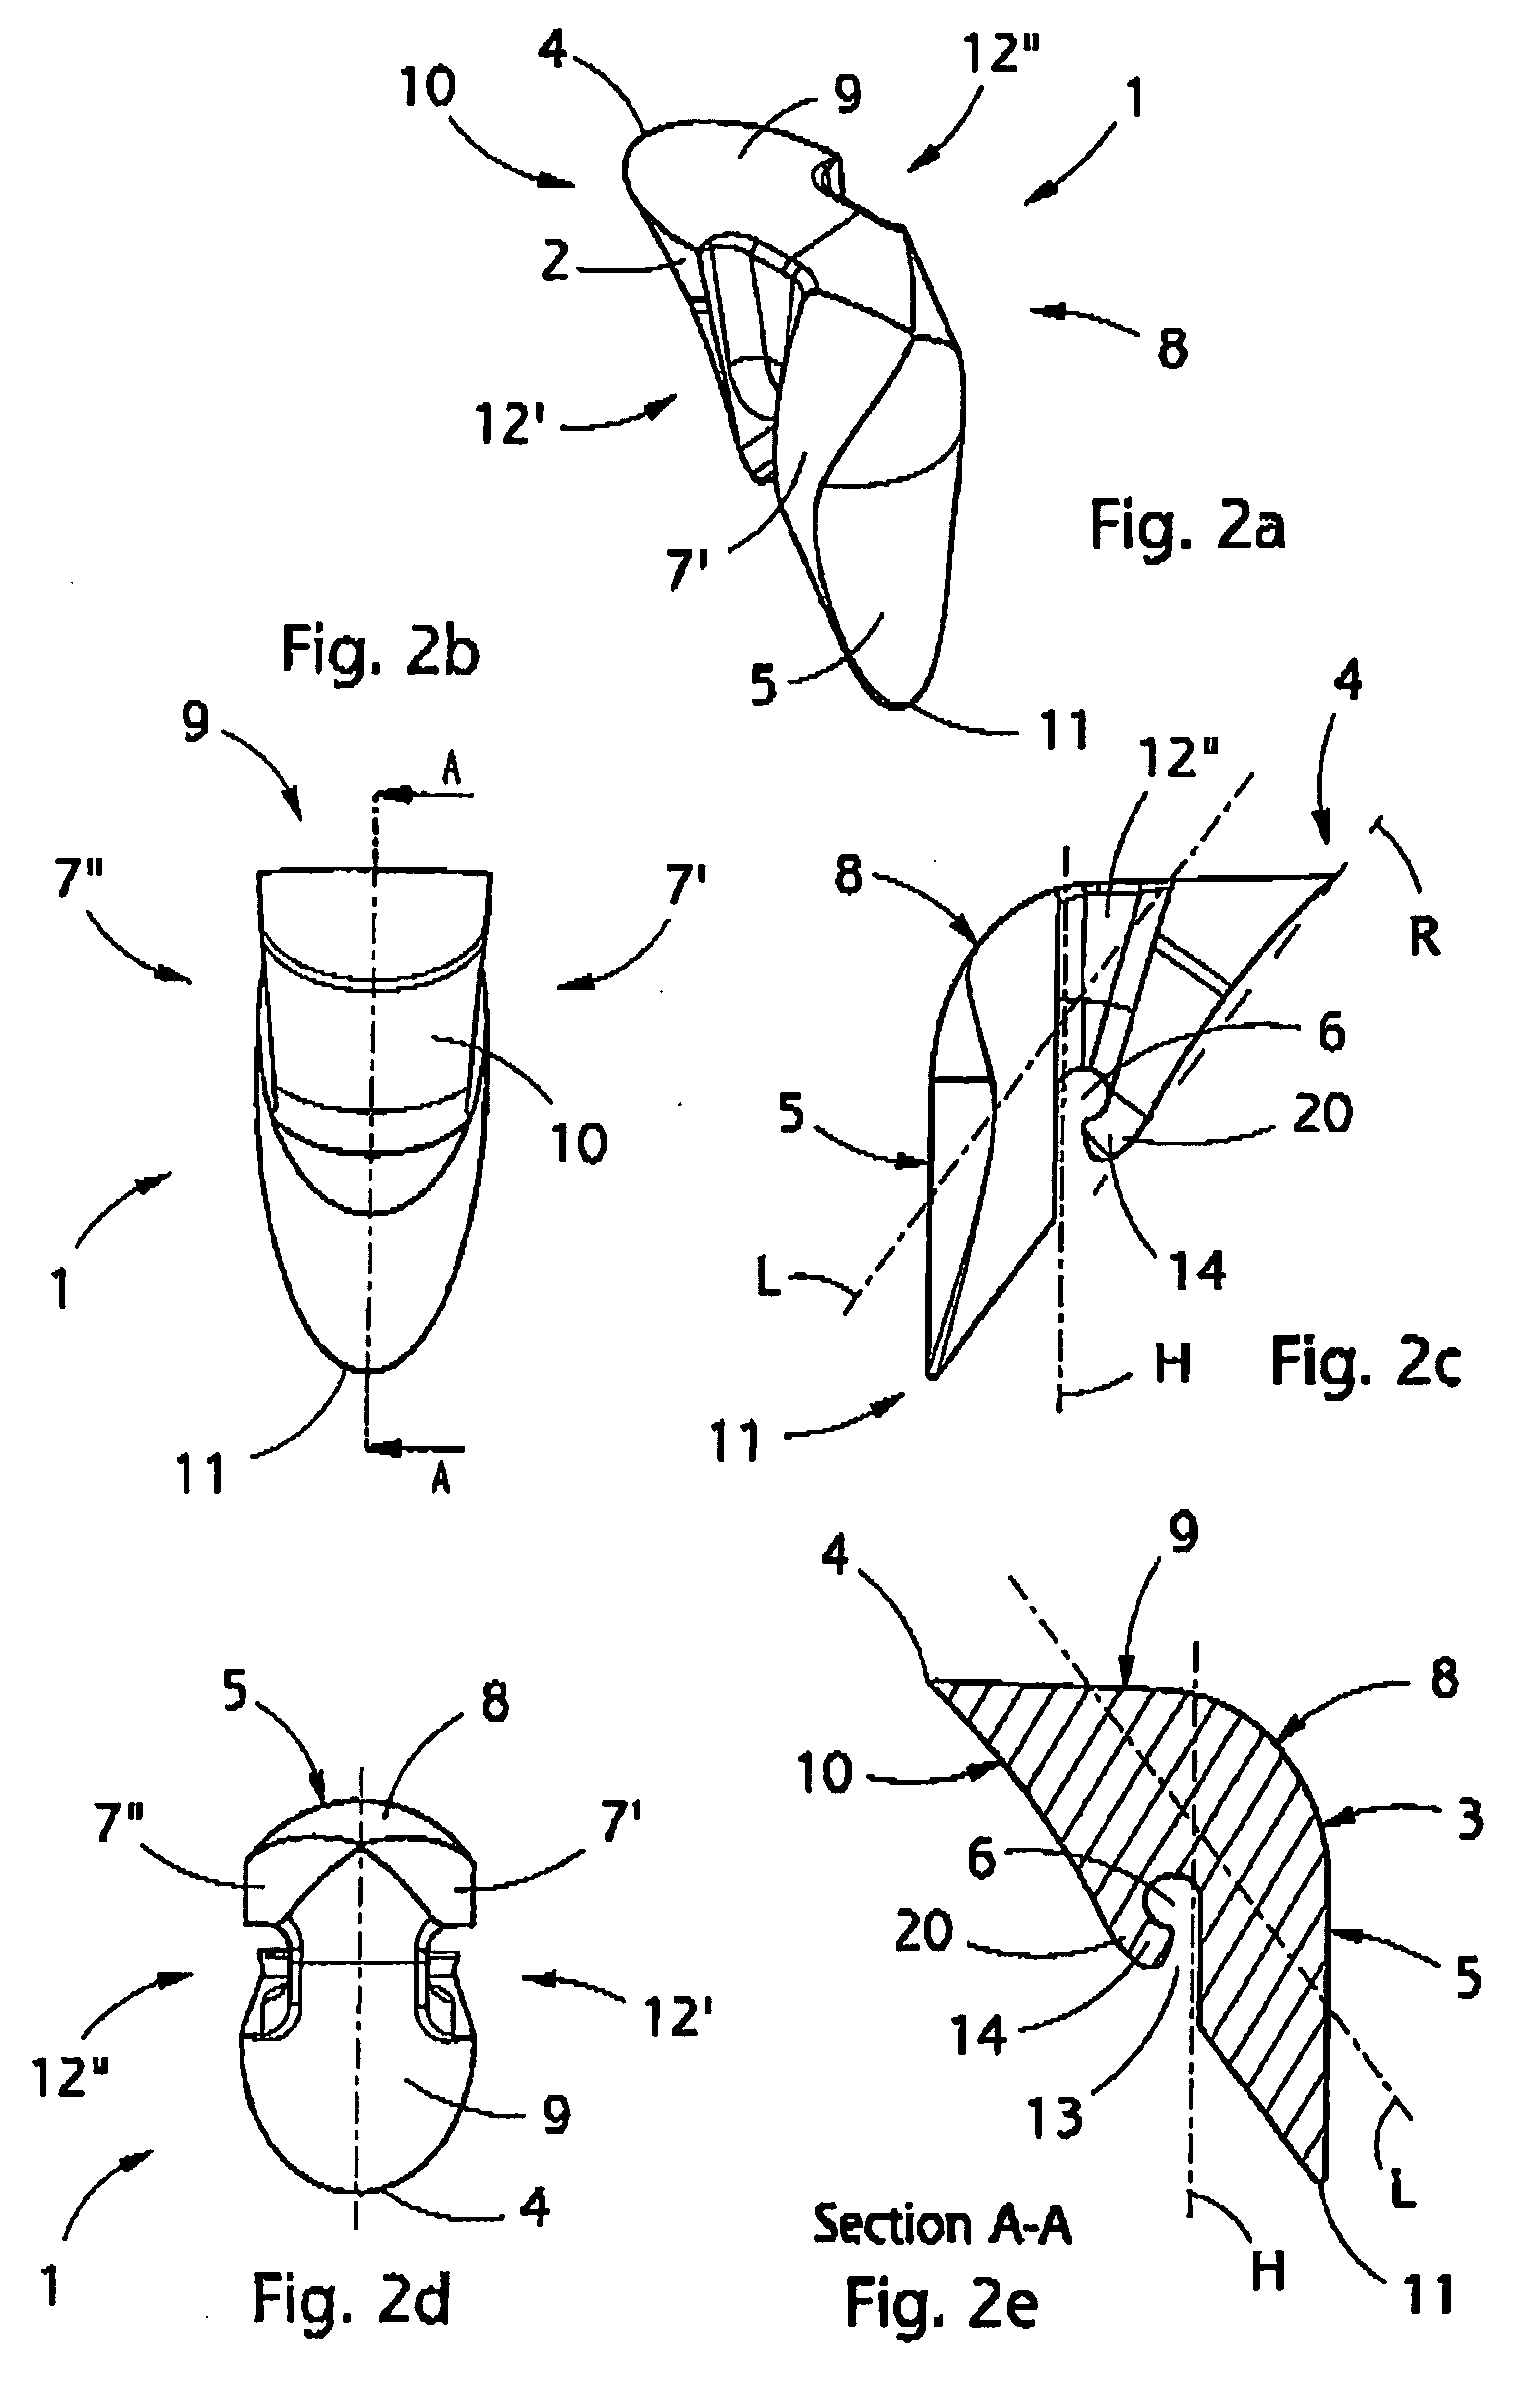 Apparatus for attaching sutures